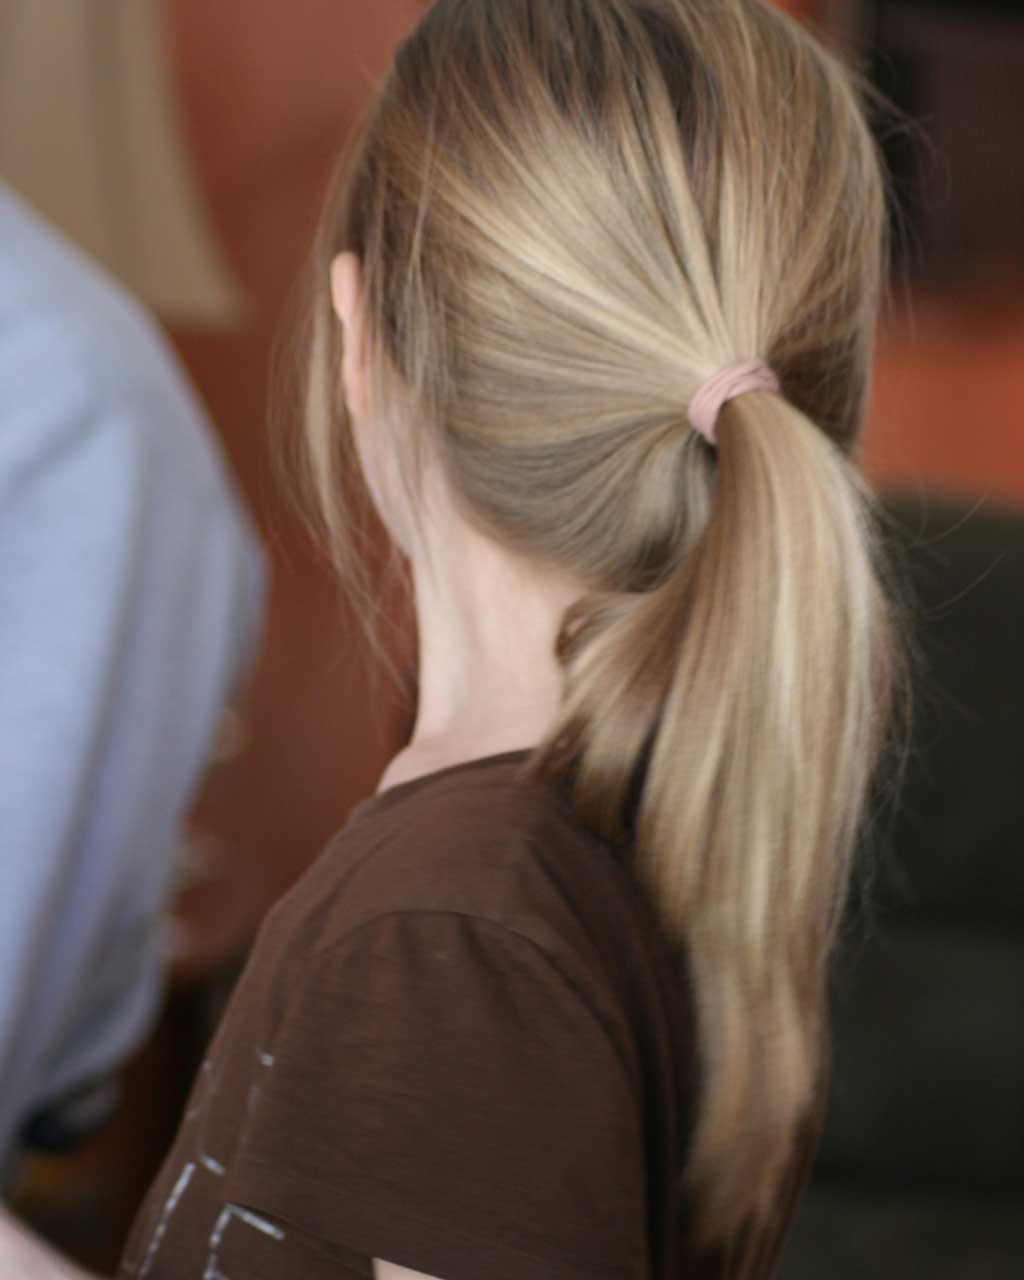 Back to School Hairstyles - The classic ponytail